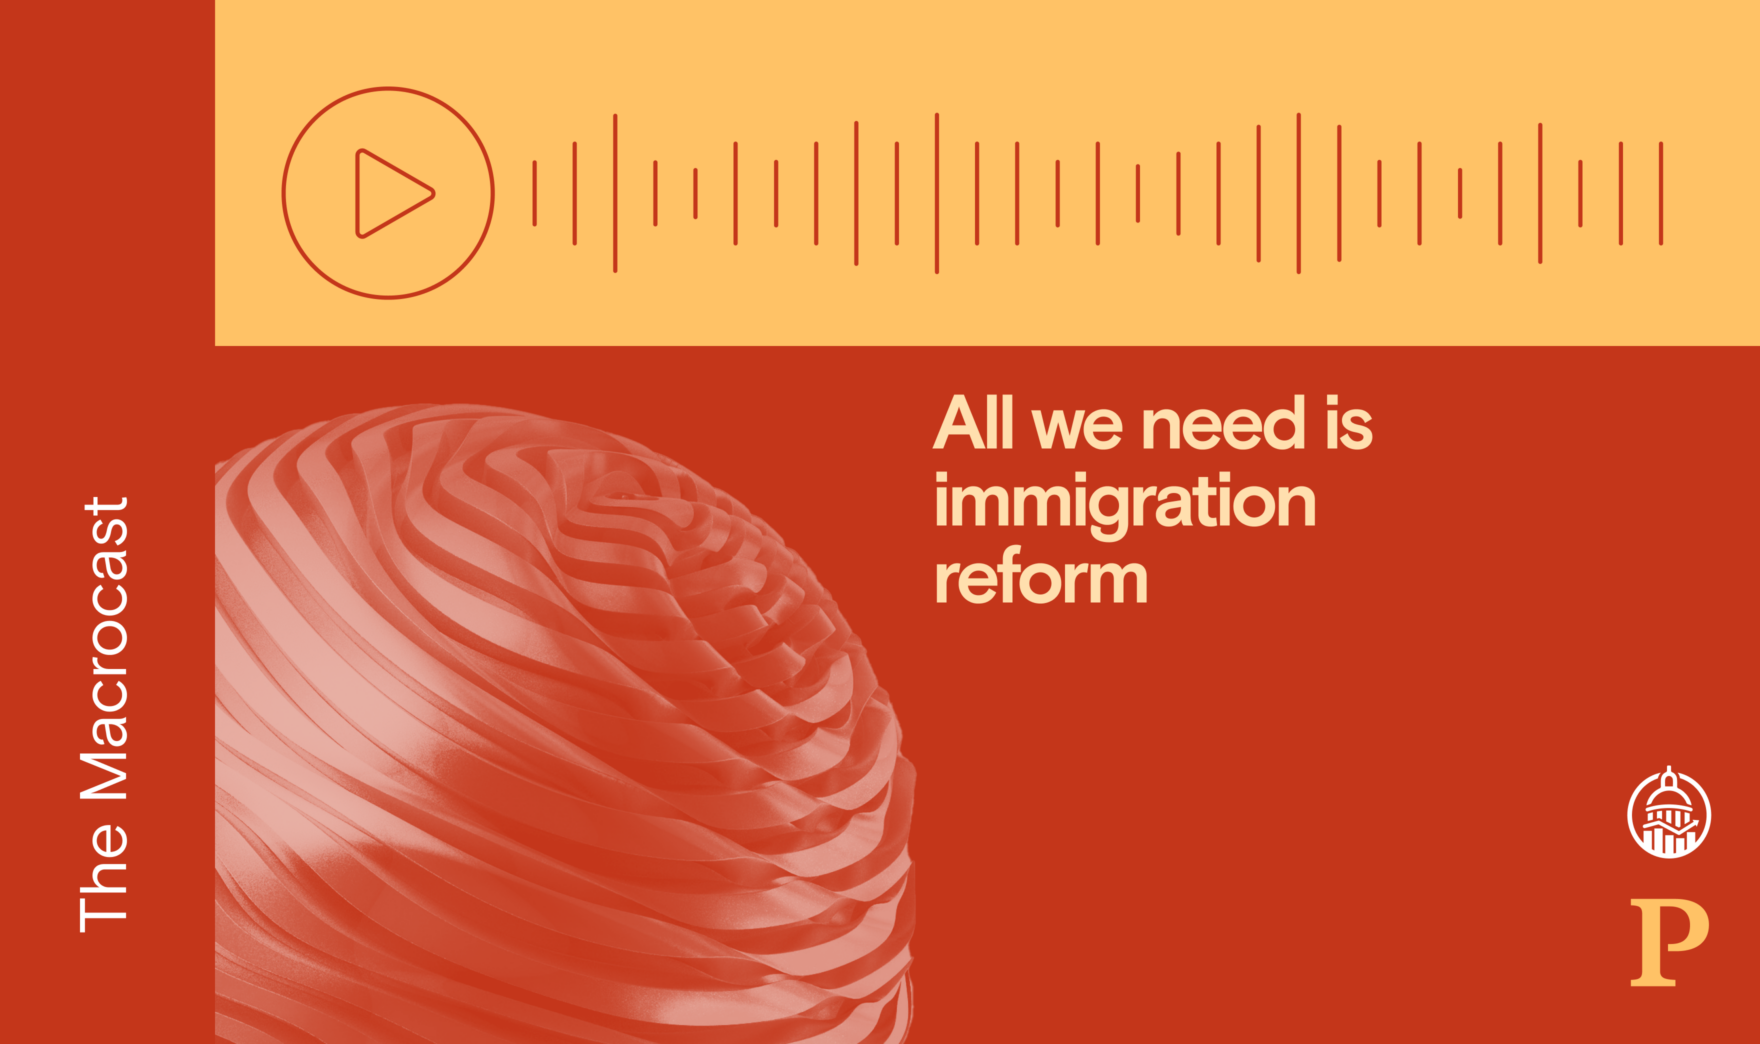 Macrocast: All we need is immigration reform